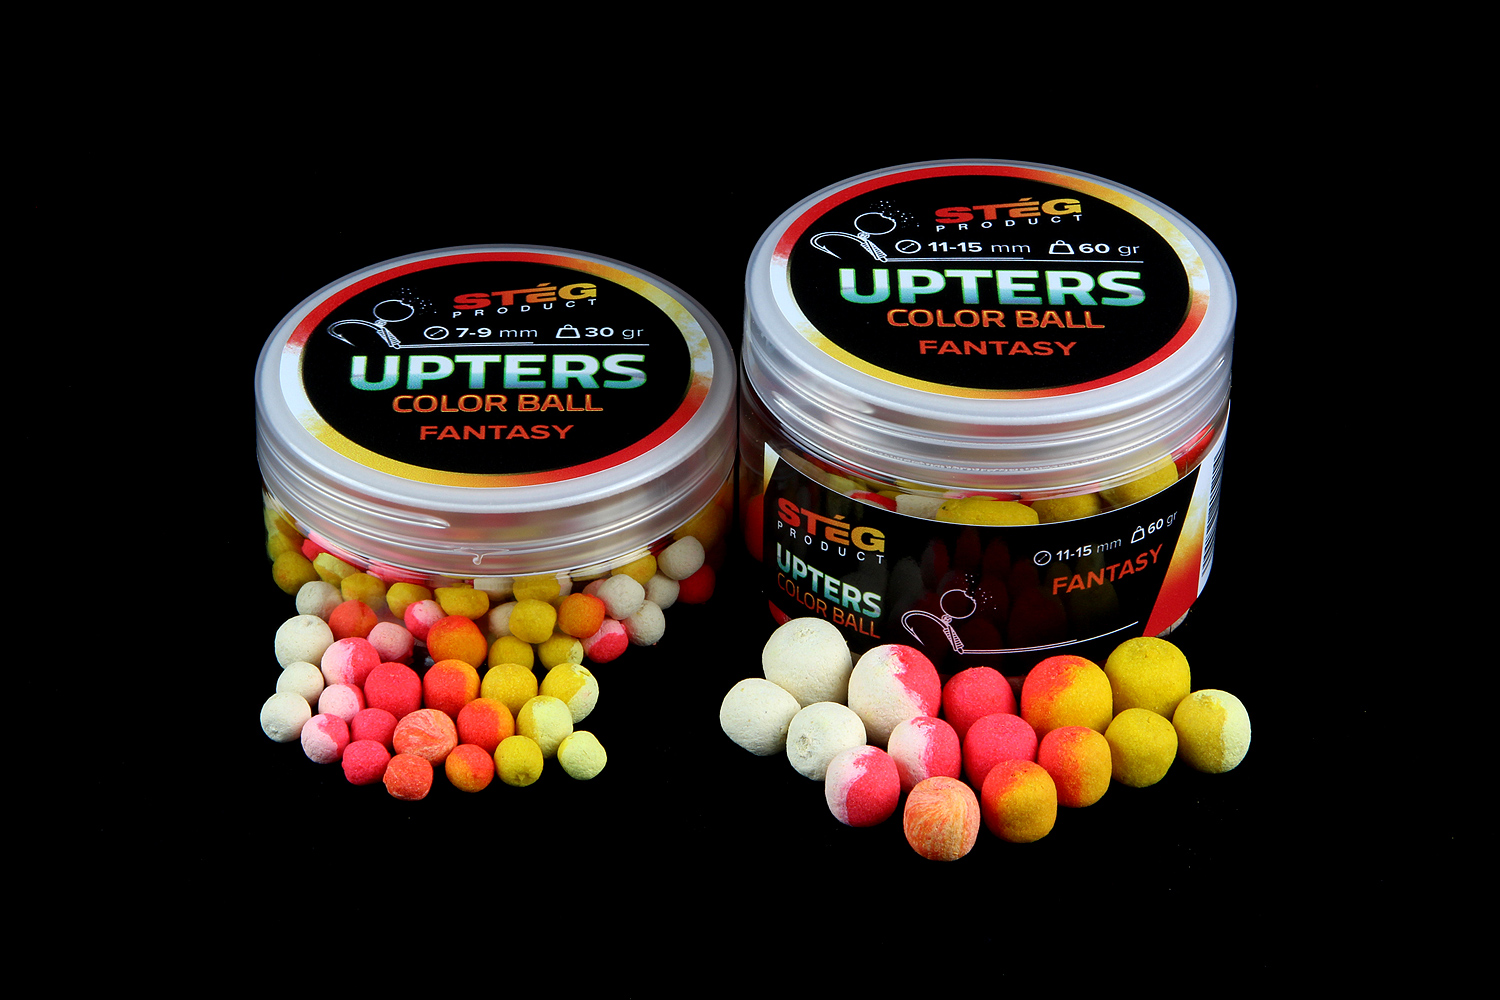 STÉG PRODUCT UPTERS COLOR BALL 11-15mm FANTASY 60gr